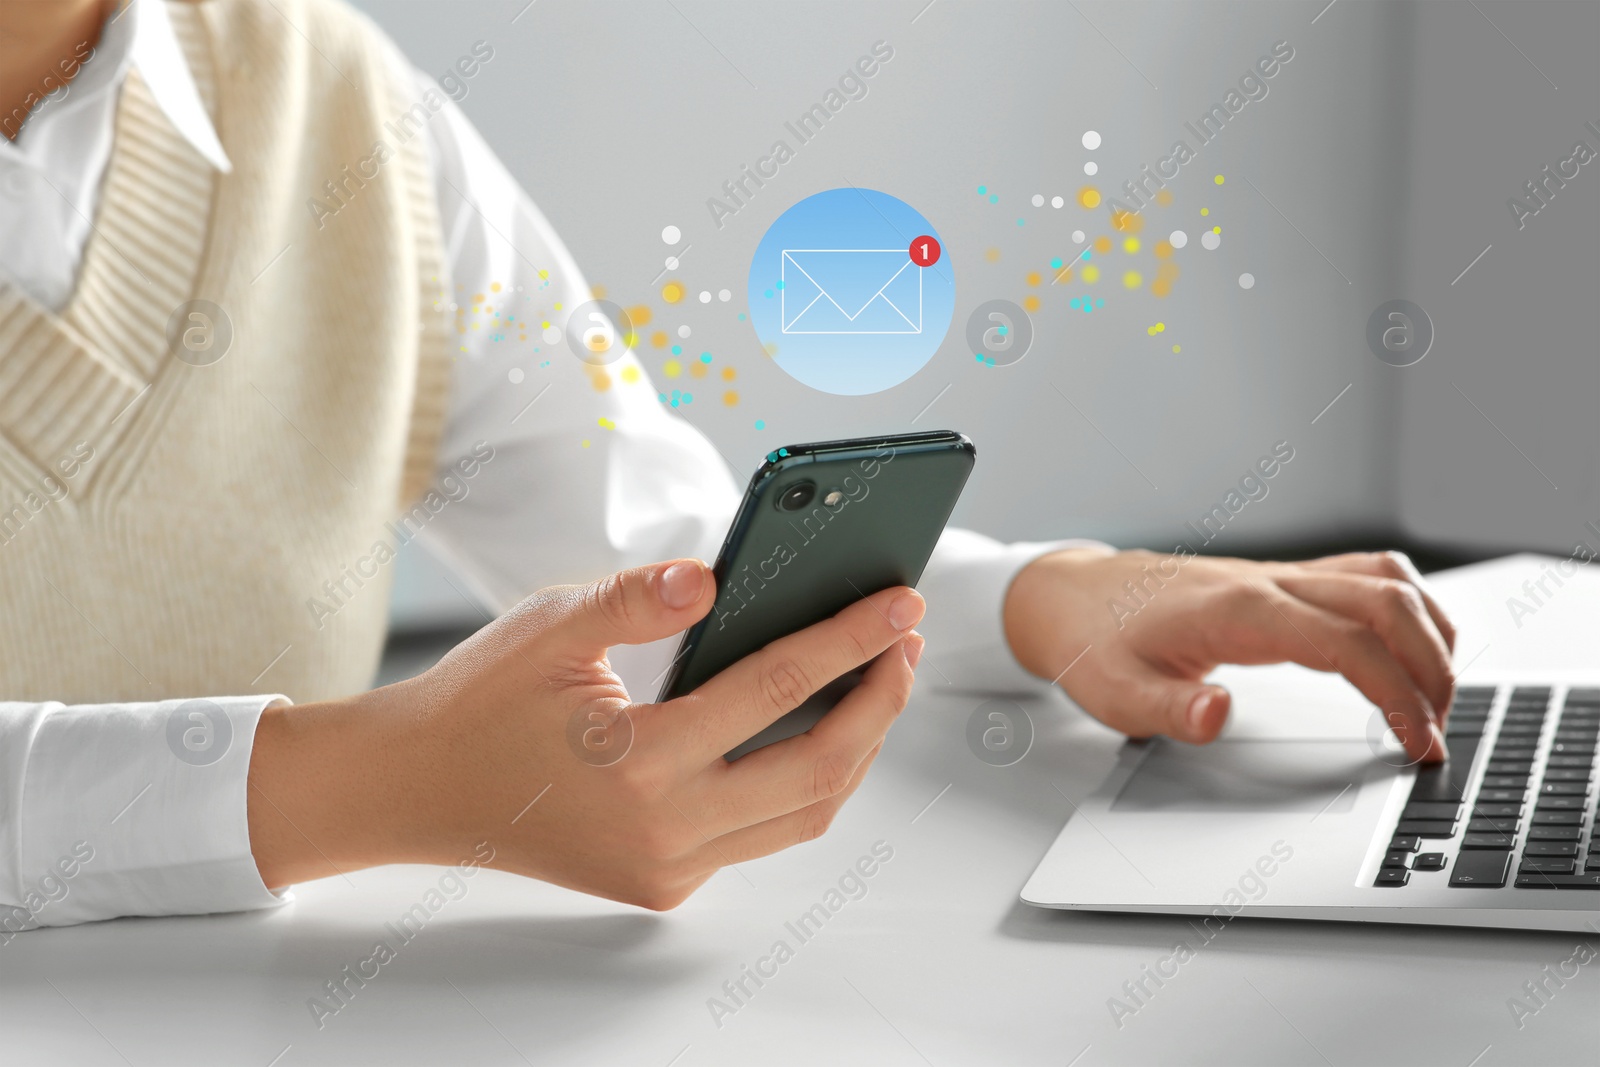 Image of Email. Woman using mobile phone and laptop indoors, closeup. Letter illustration over device